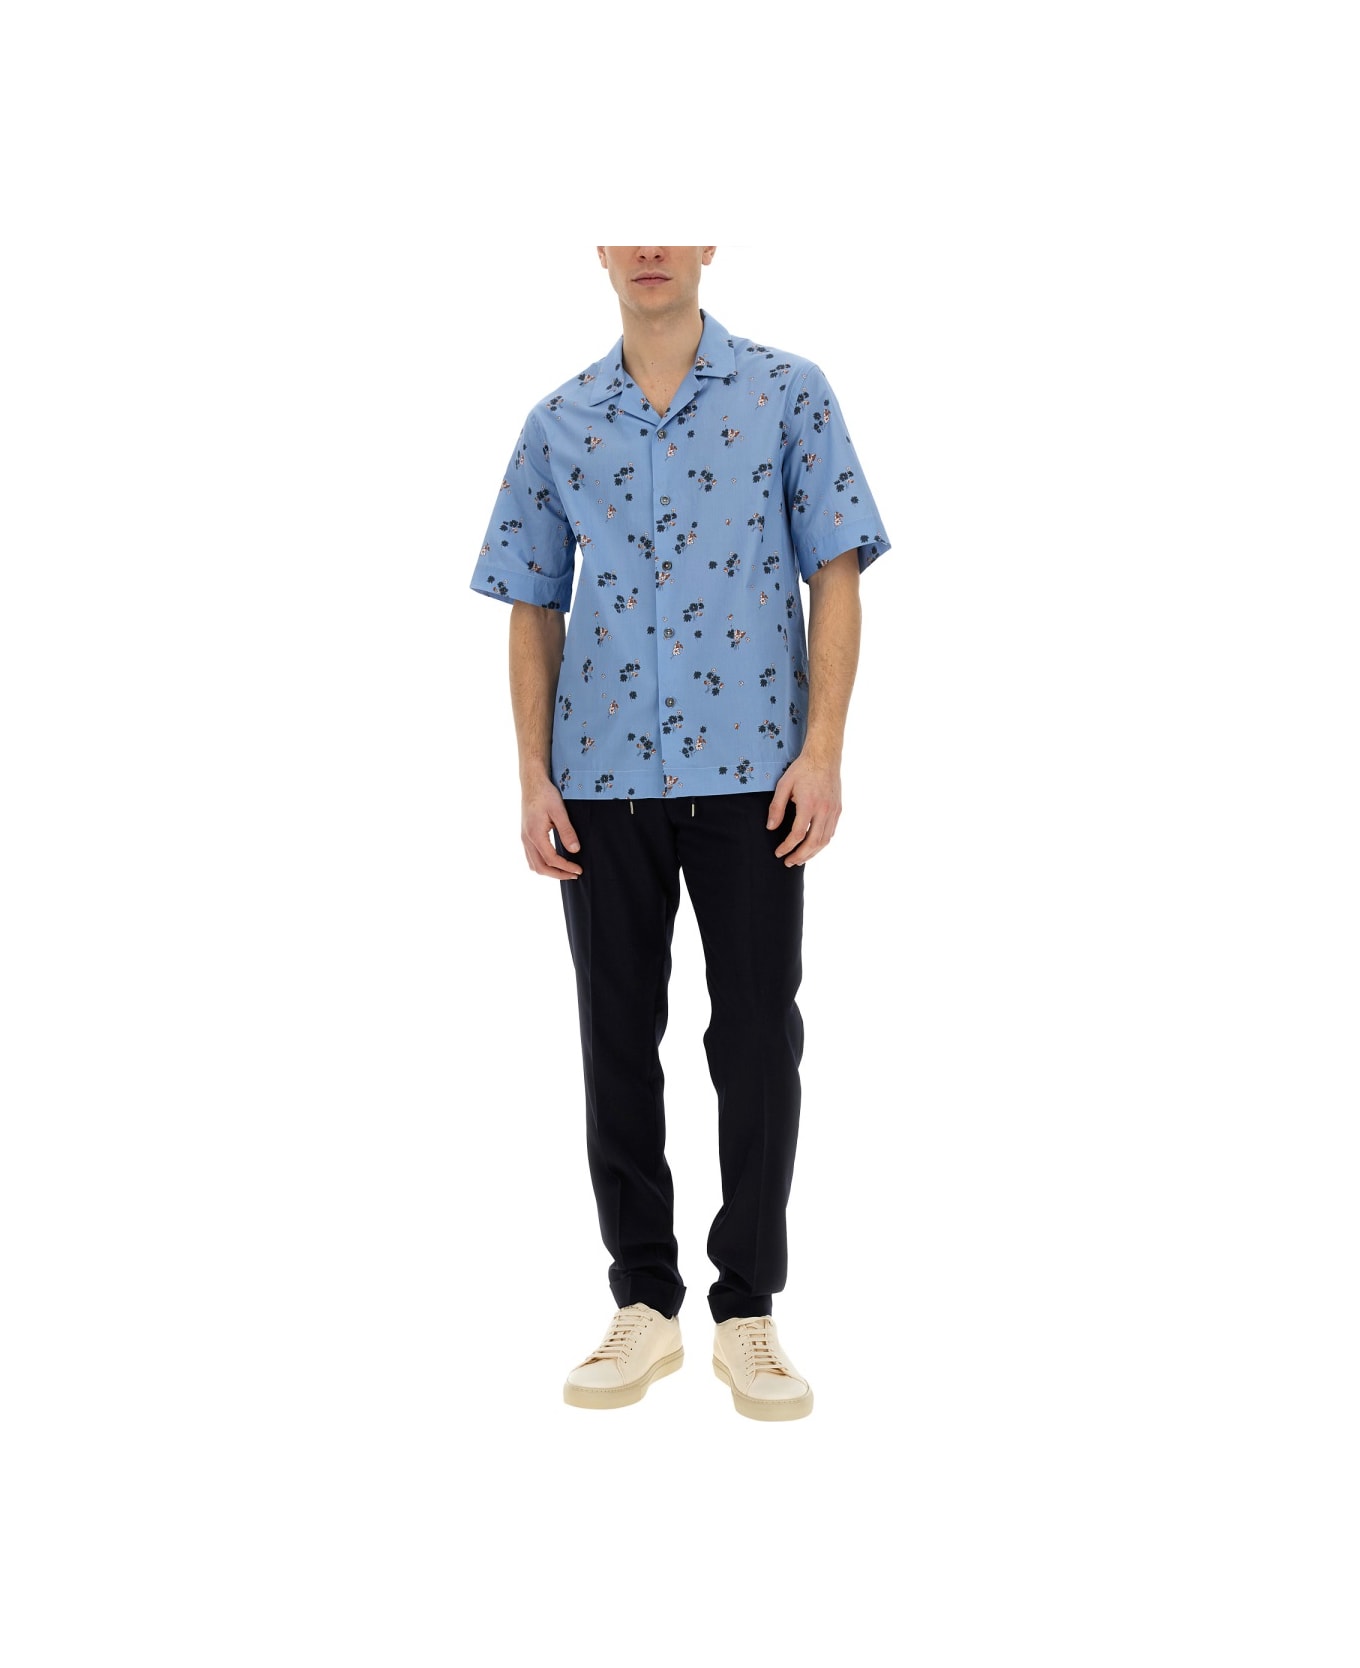 Paul Smith Shirt With Floral Pattern - AZURE シャツ